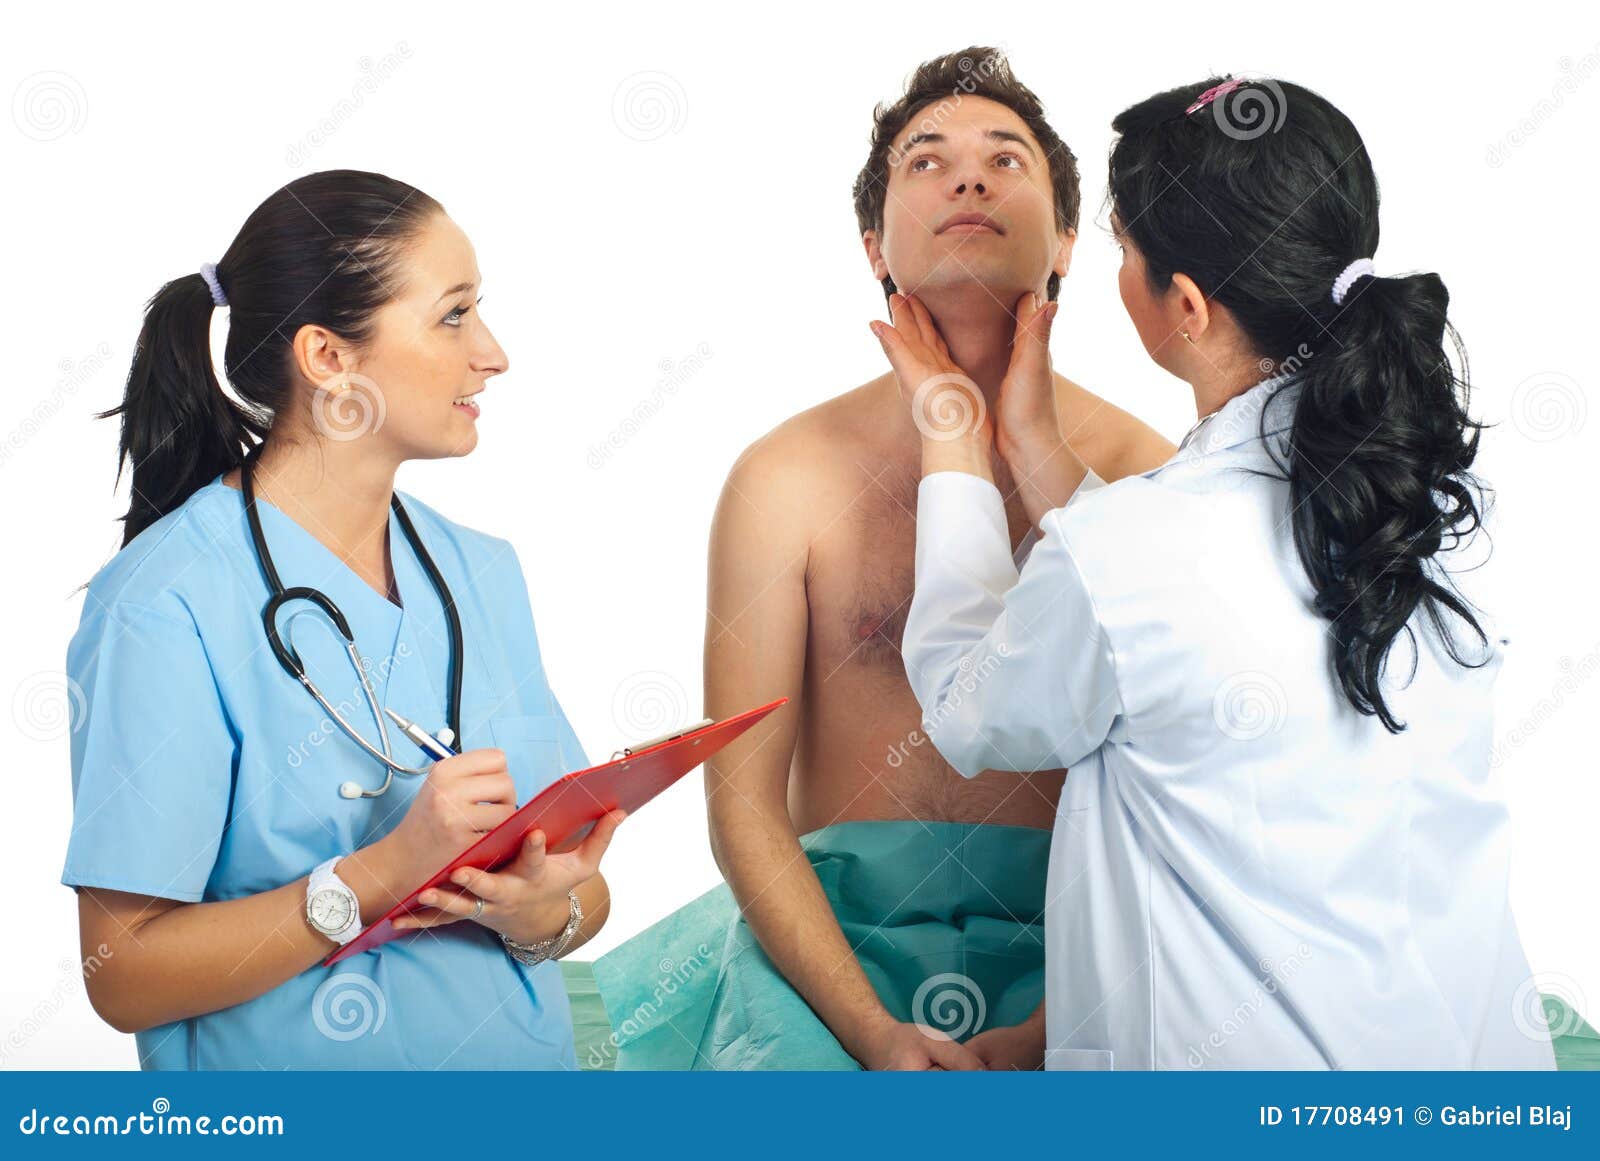 doctor examine thyroid male patient